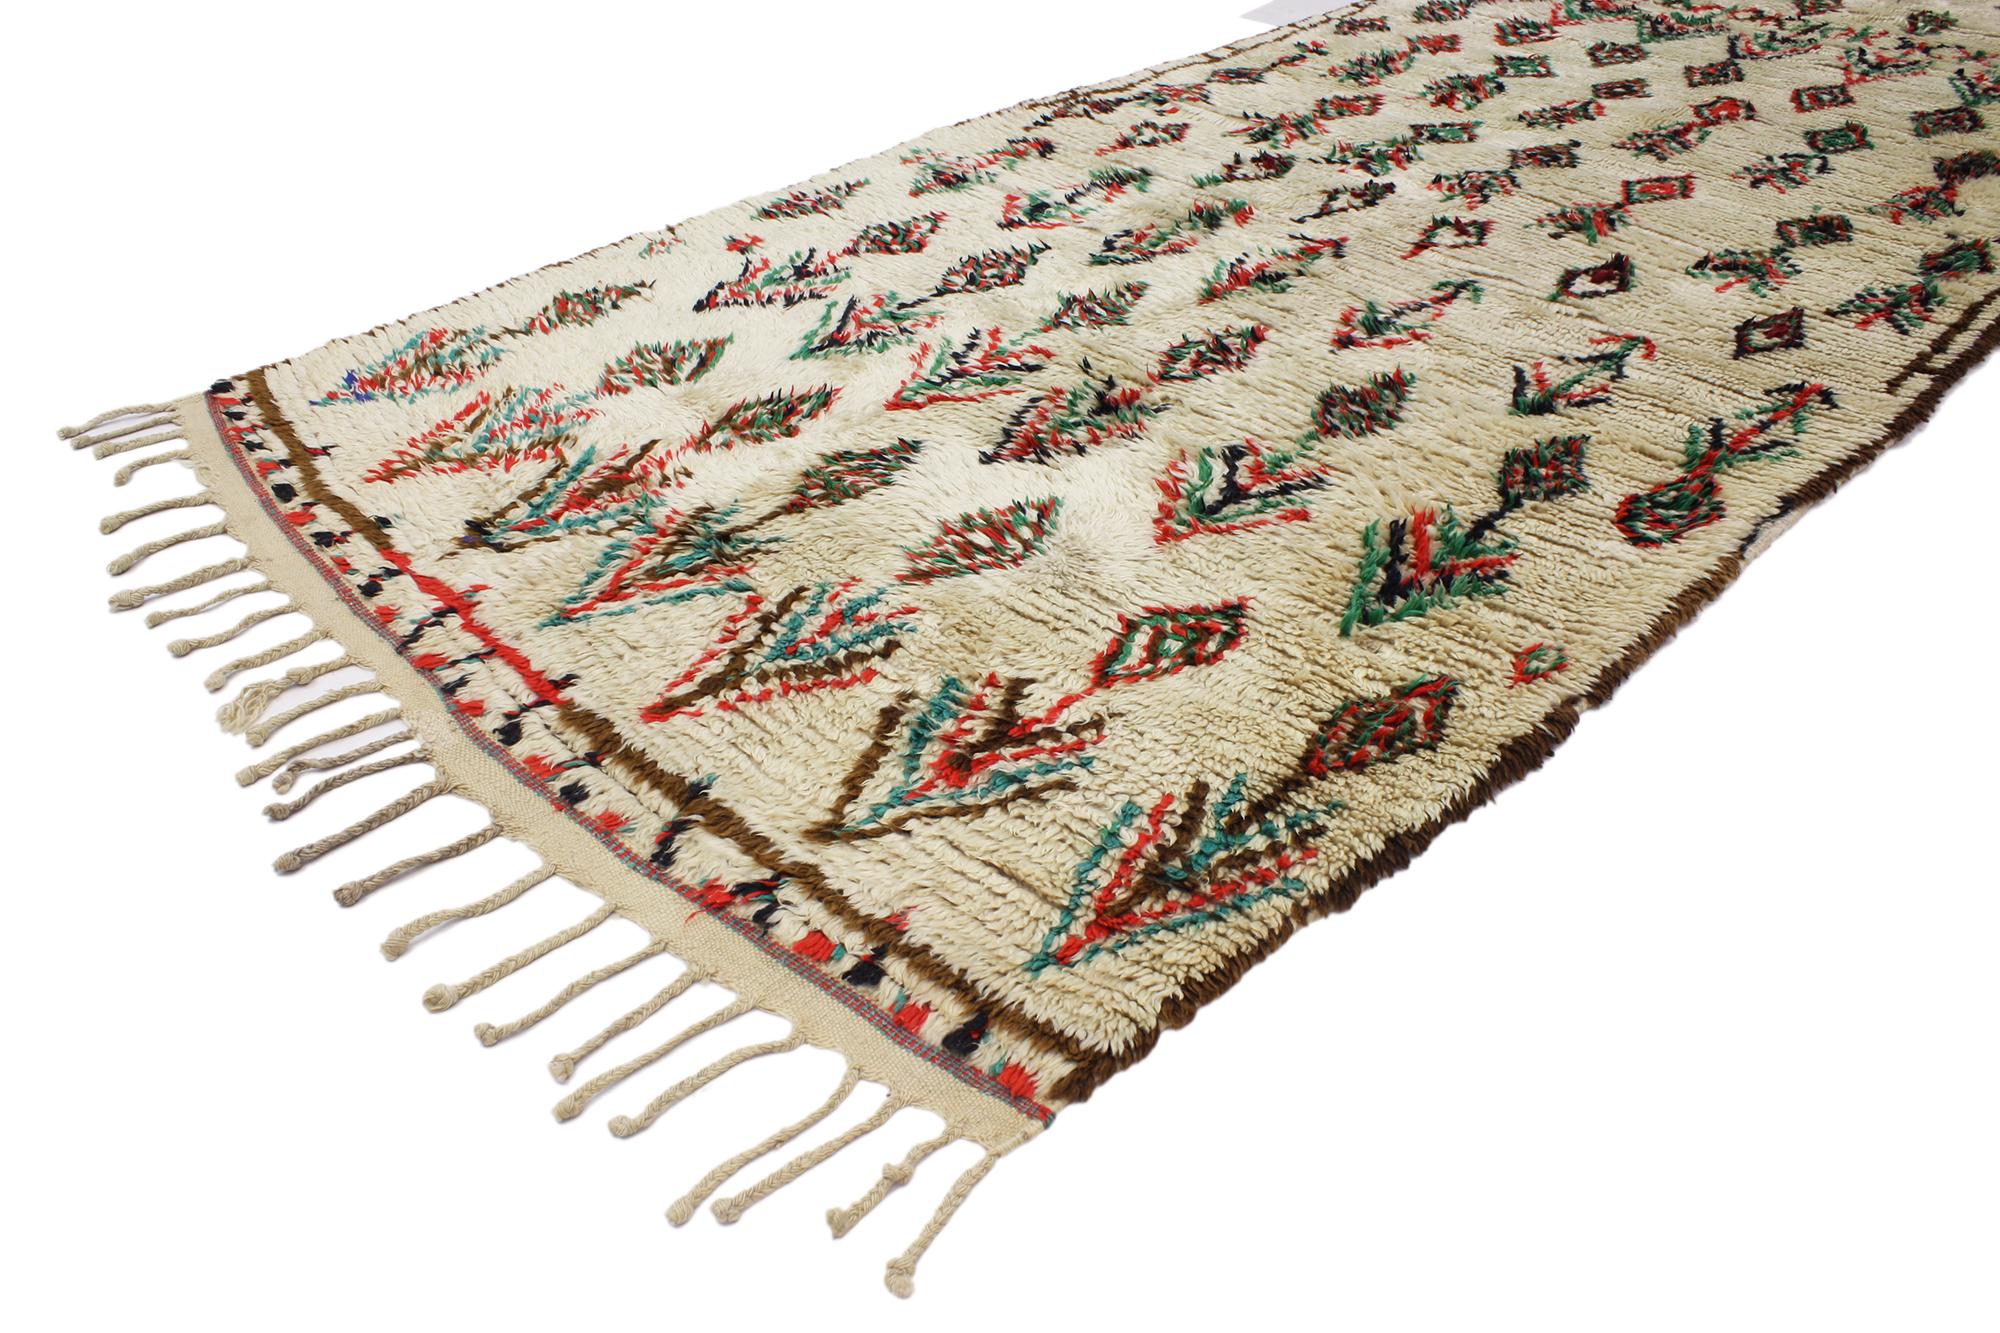 20363 Vintage Berber Moroccan Azilal Rug Runner with Tribal Bohemian Style 04'03 x 11'00. With its boho chic style and nomadic charm, this vintage Berber Moroccan Azilal runner with modern tribal design conveys a sense of beauty and mystery.